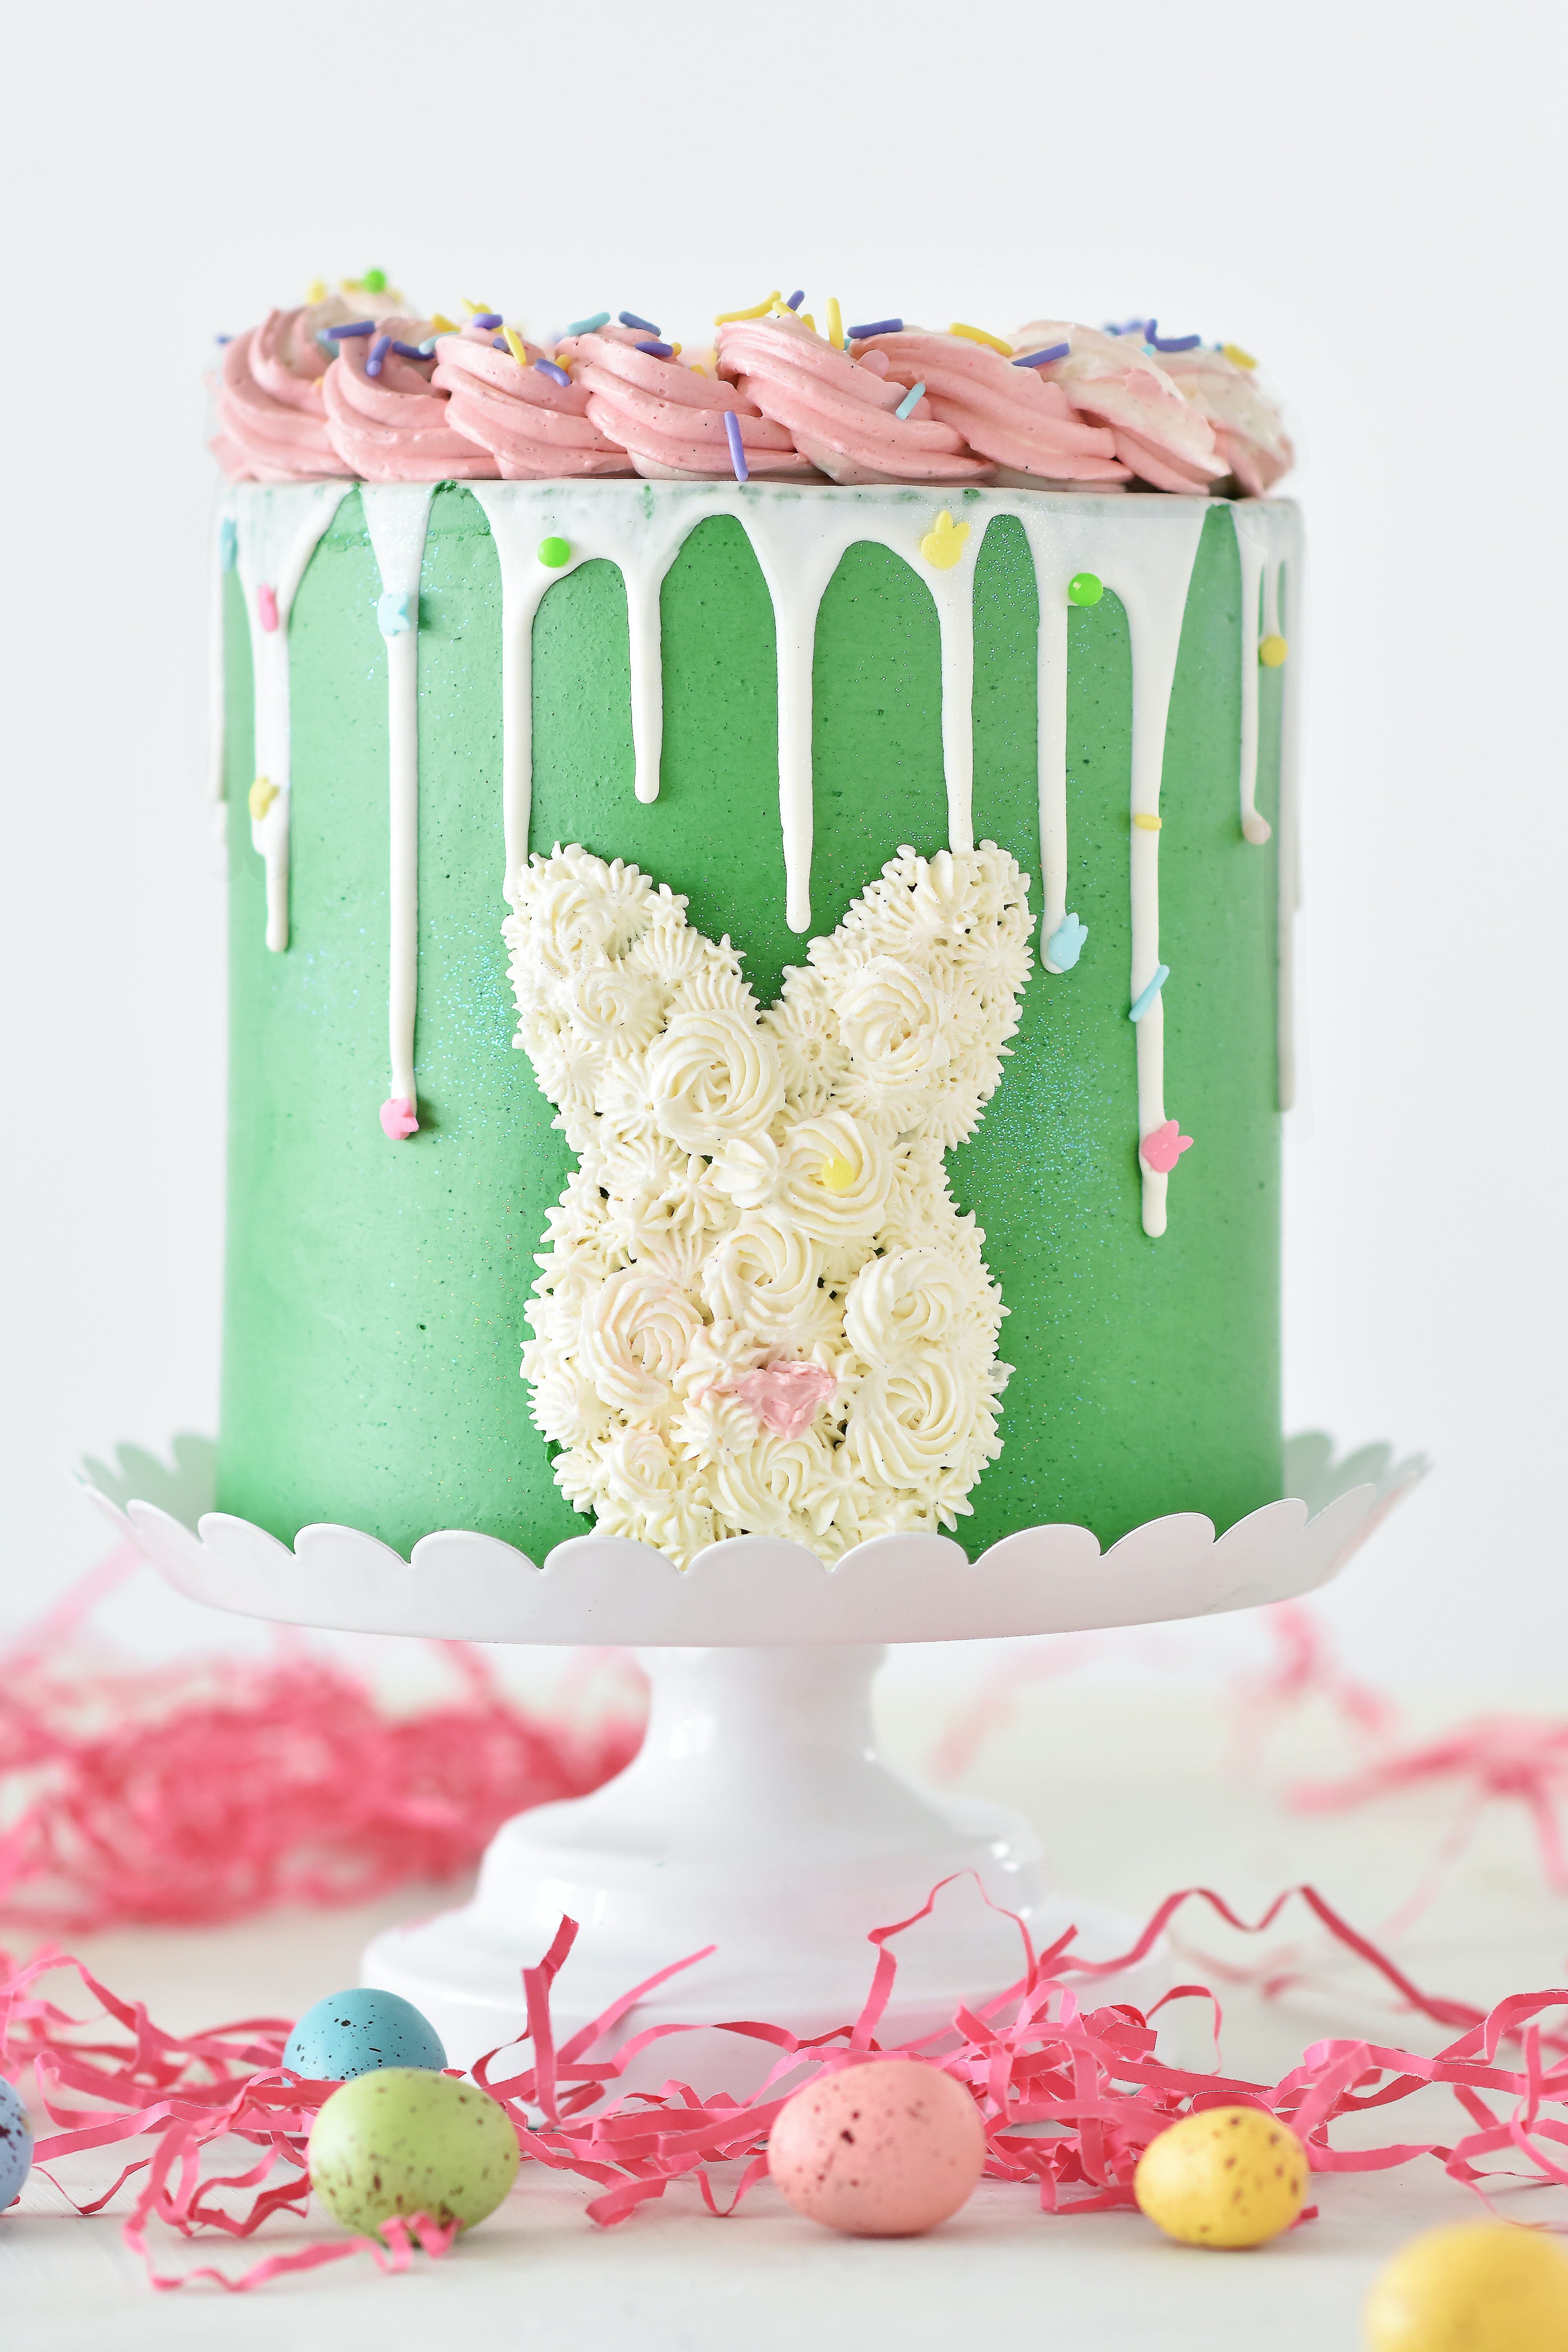 73191 download wallpaper food, easter, holiday, cake screensavers and pictures for free